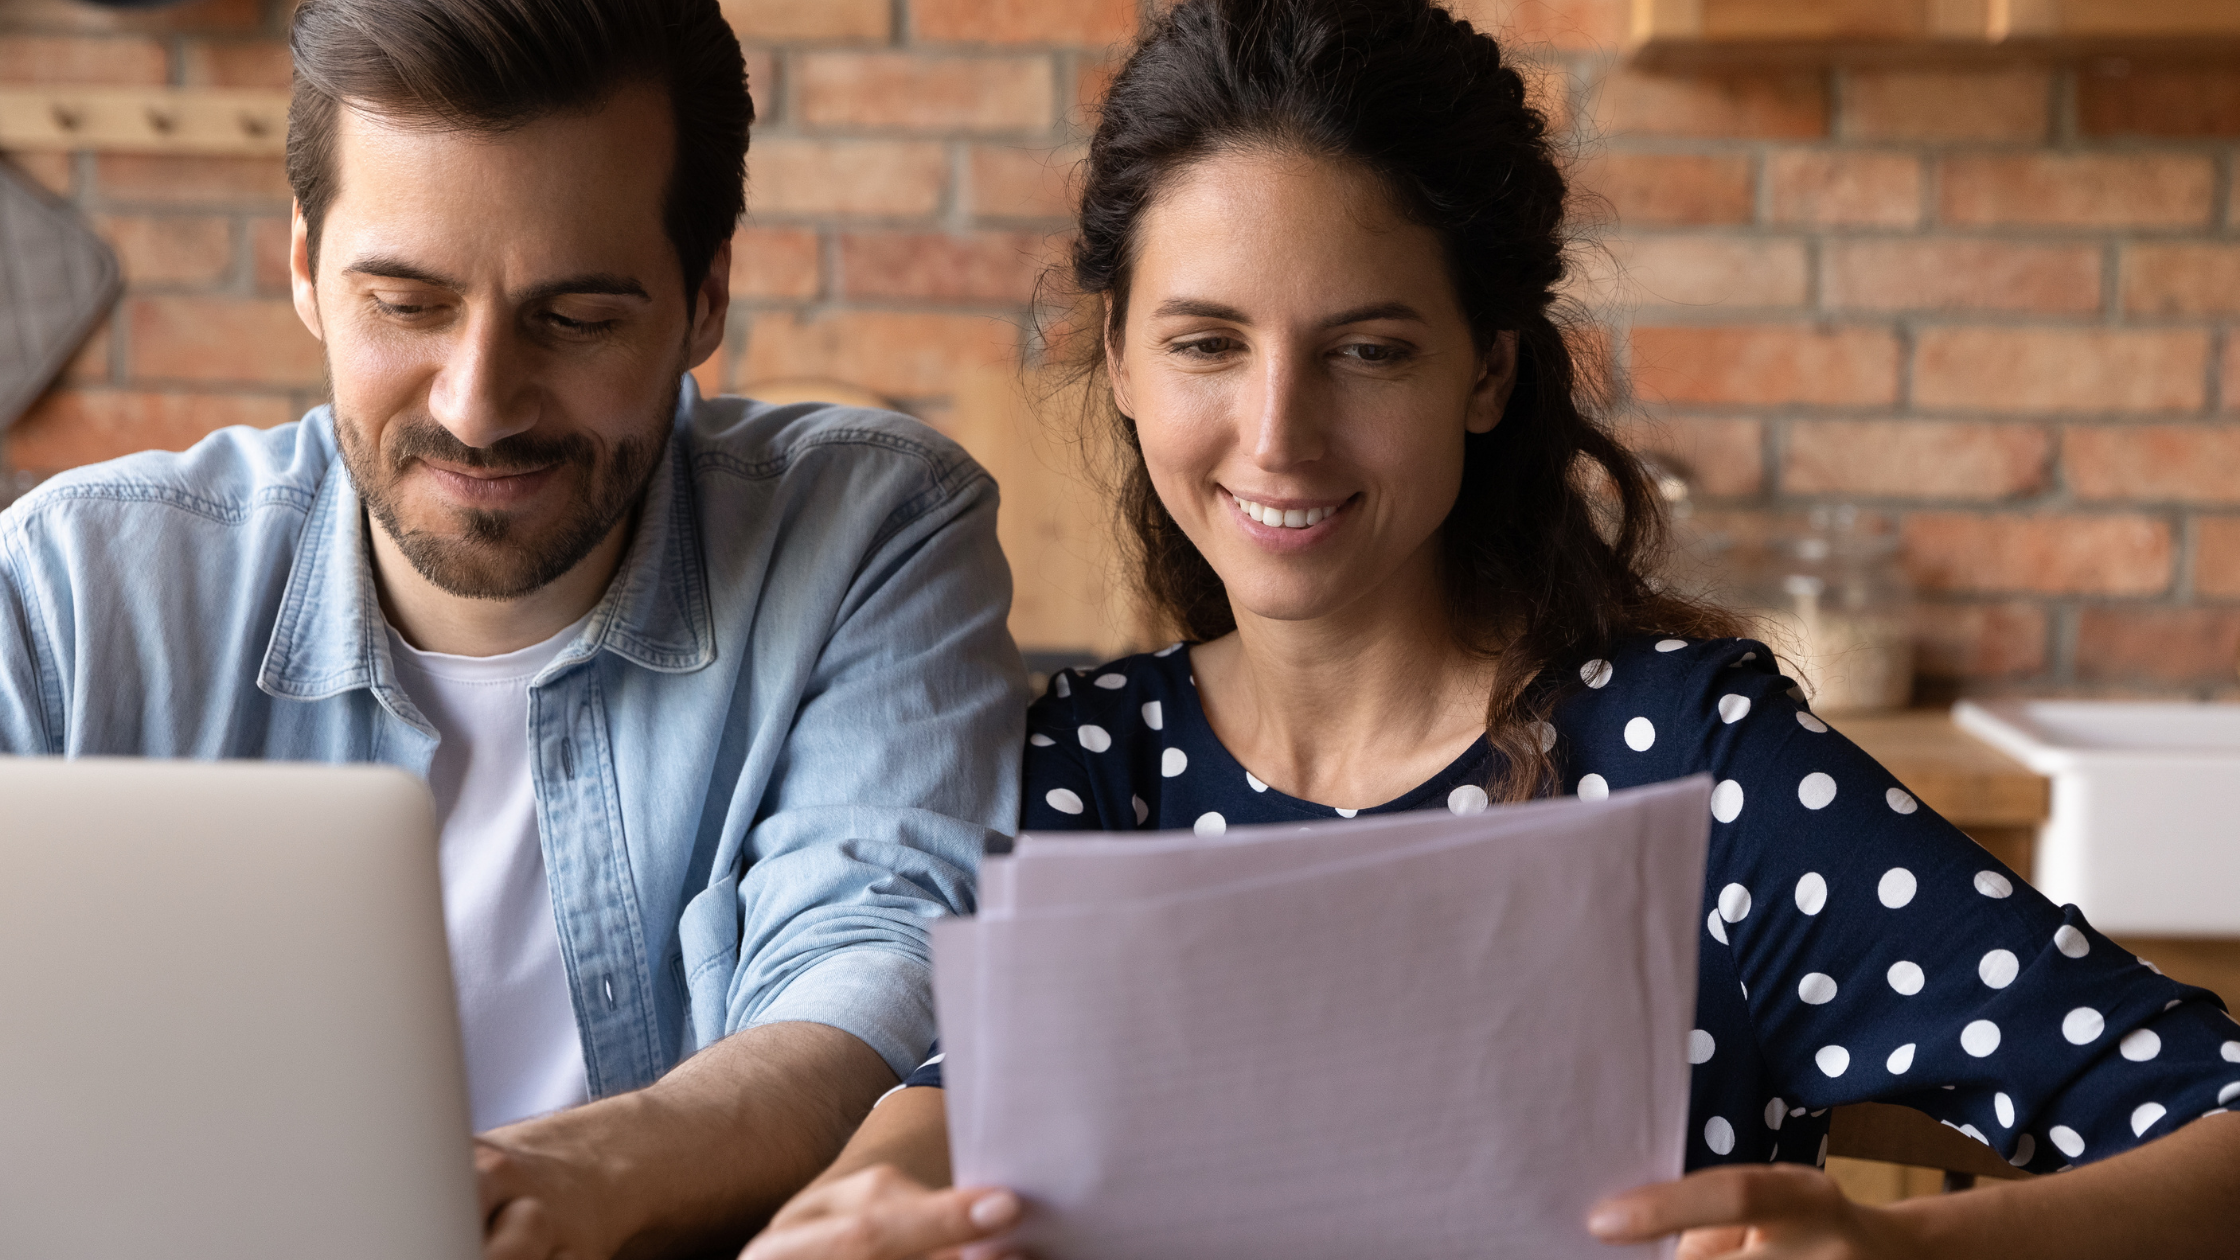 Does My Spouse’s Credit Affect Me Buying a Home